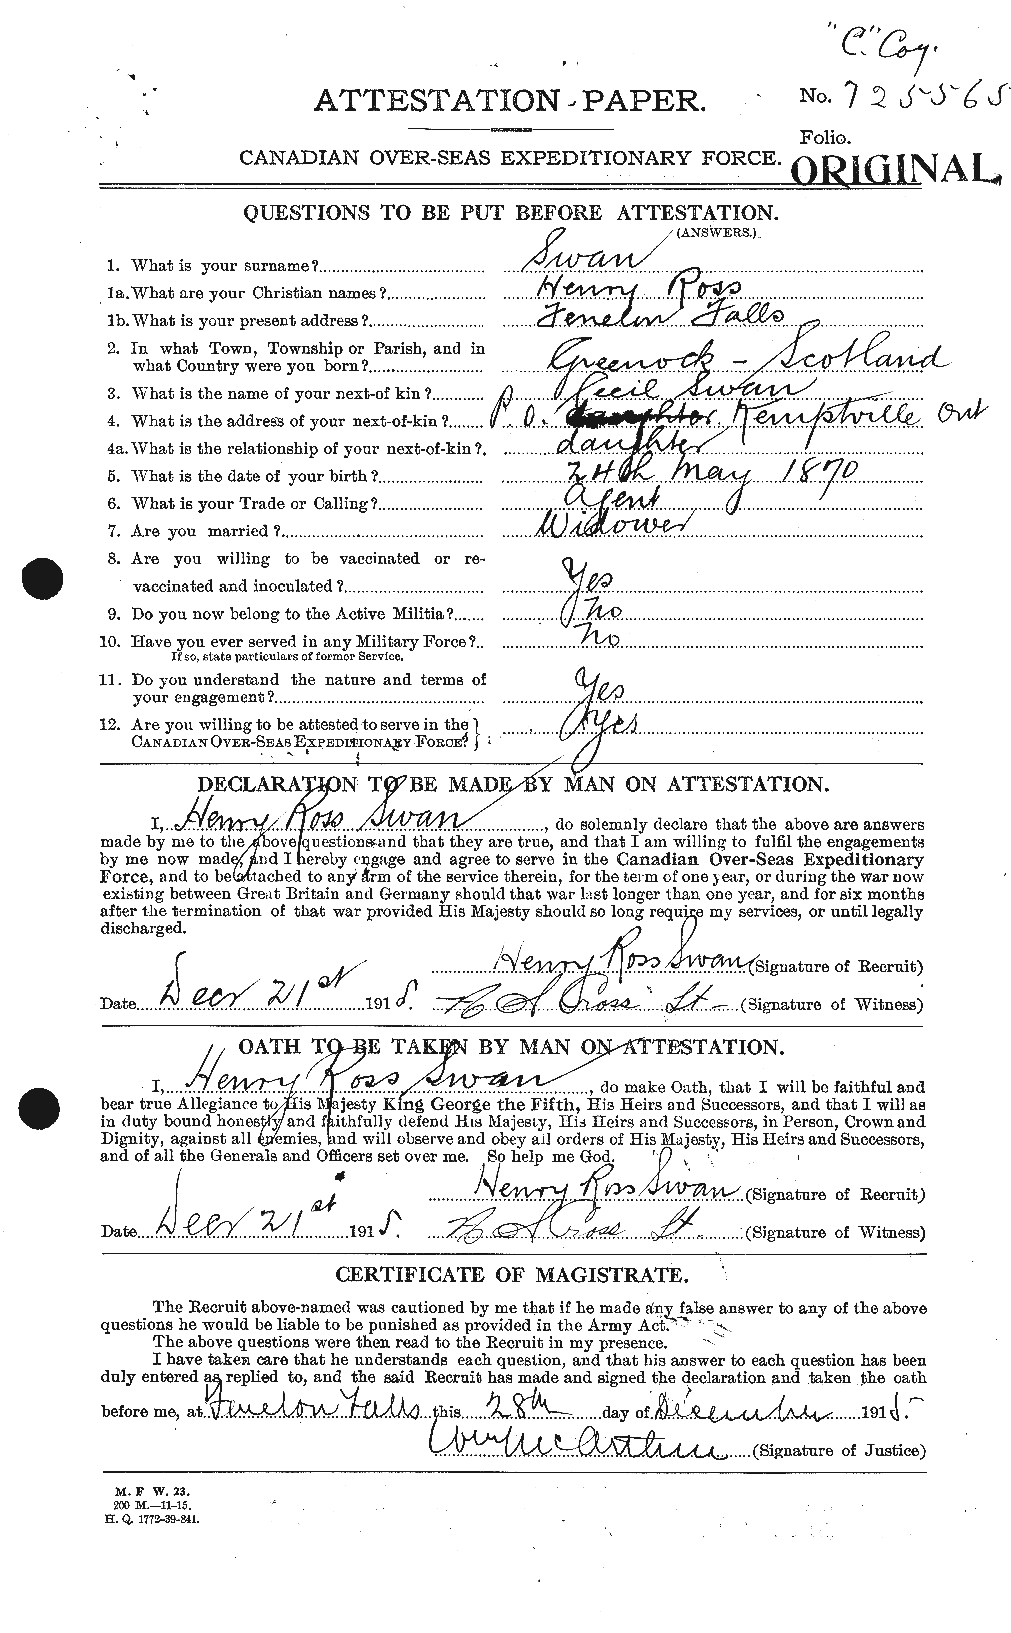 Personnel Records of the First World War - CEF 127347a